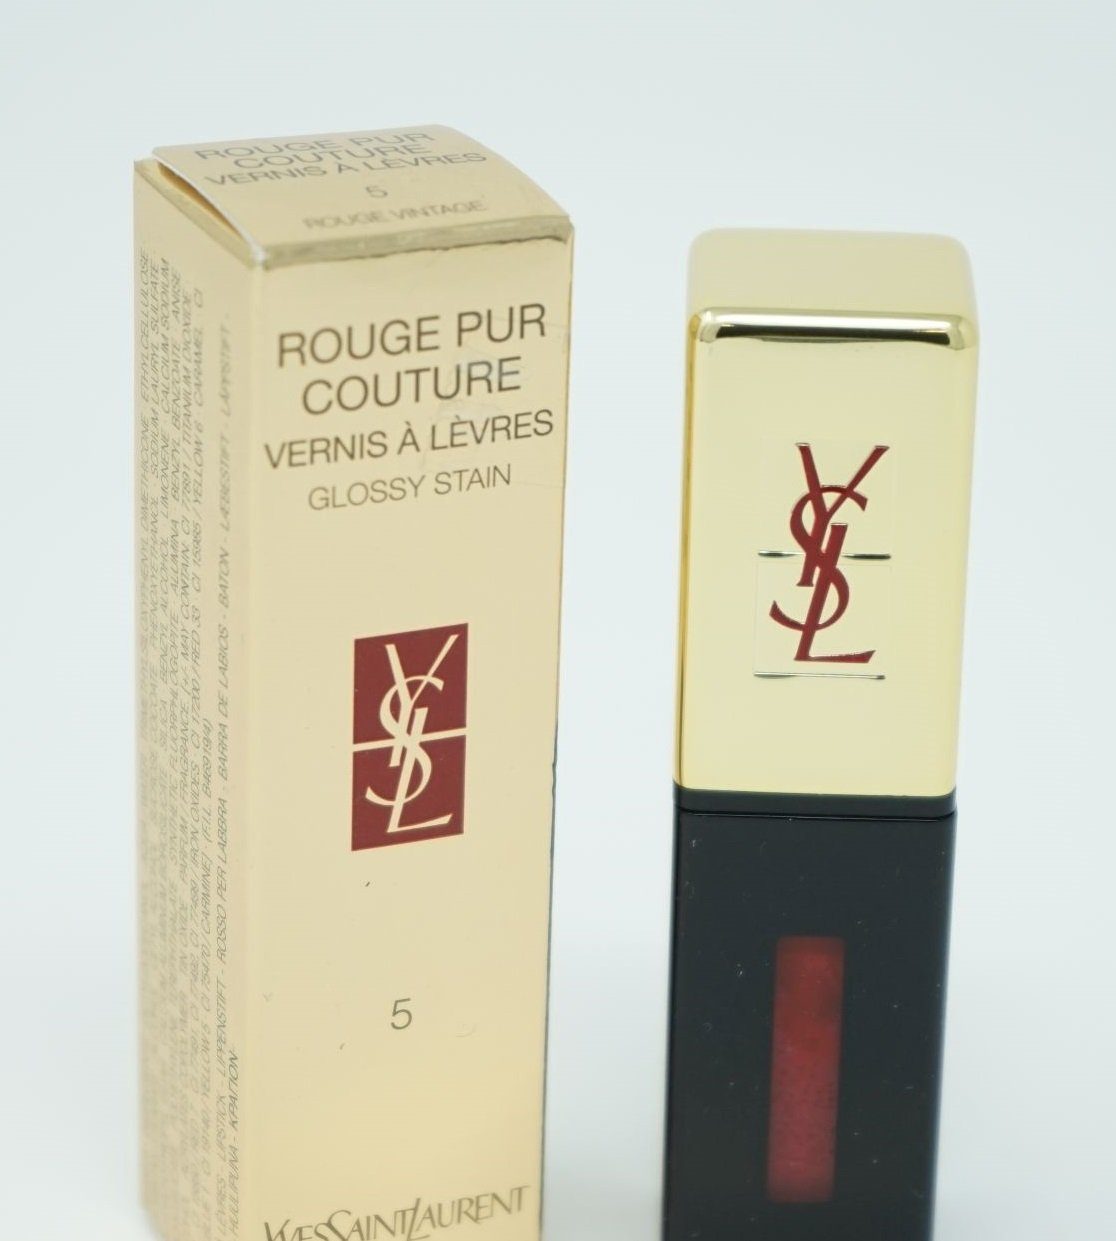 YVES SAINT LAURENT Lipgloss Yves Saint Laurent Rouge Pur Couture Vernis A Levres Glossy Stain